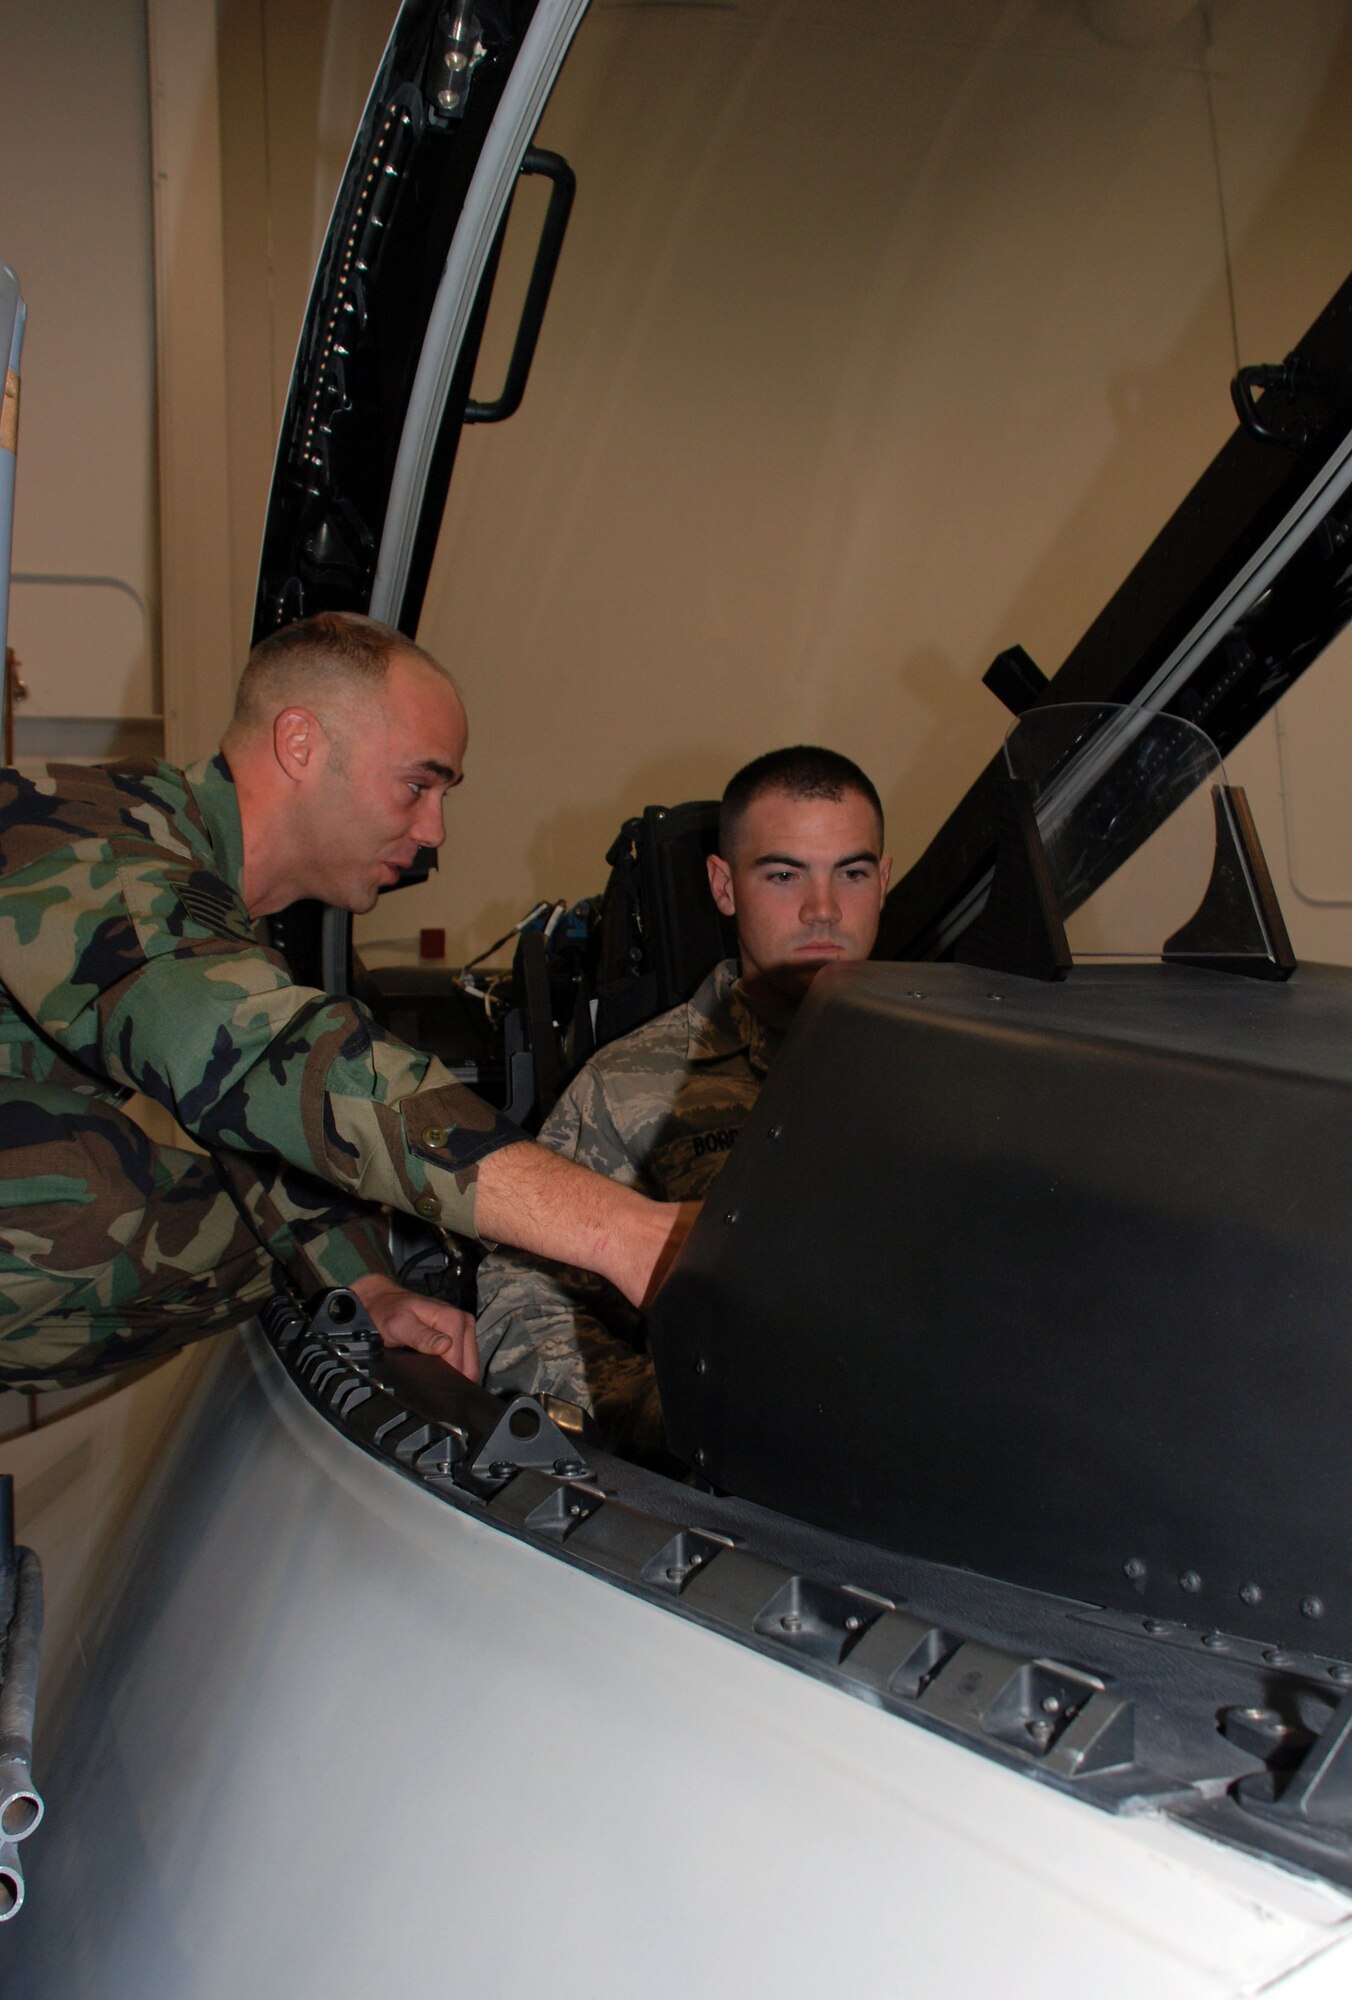 Staff Sgt. Chris Dippold, a F-22 Raptor crew chief course instructor with the 362nd Training Squadron shows Airman 1st Class Michael Borden, an Airmen in Training in the F-22 Raptor crew chief course, the inside of a Raptor cockpit trainer Jan. 29. Airman Borden is one of the first Airmen to attend training in the new Raptor Maintenace Training Facility. (U.S. Air Force photo/Airman 1st Class Jacob Corbin)